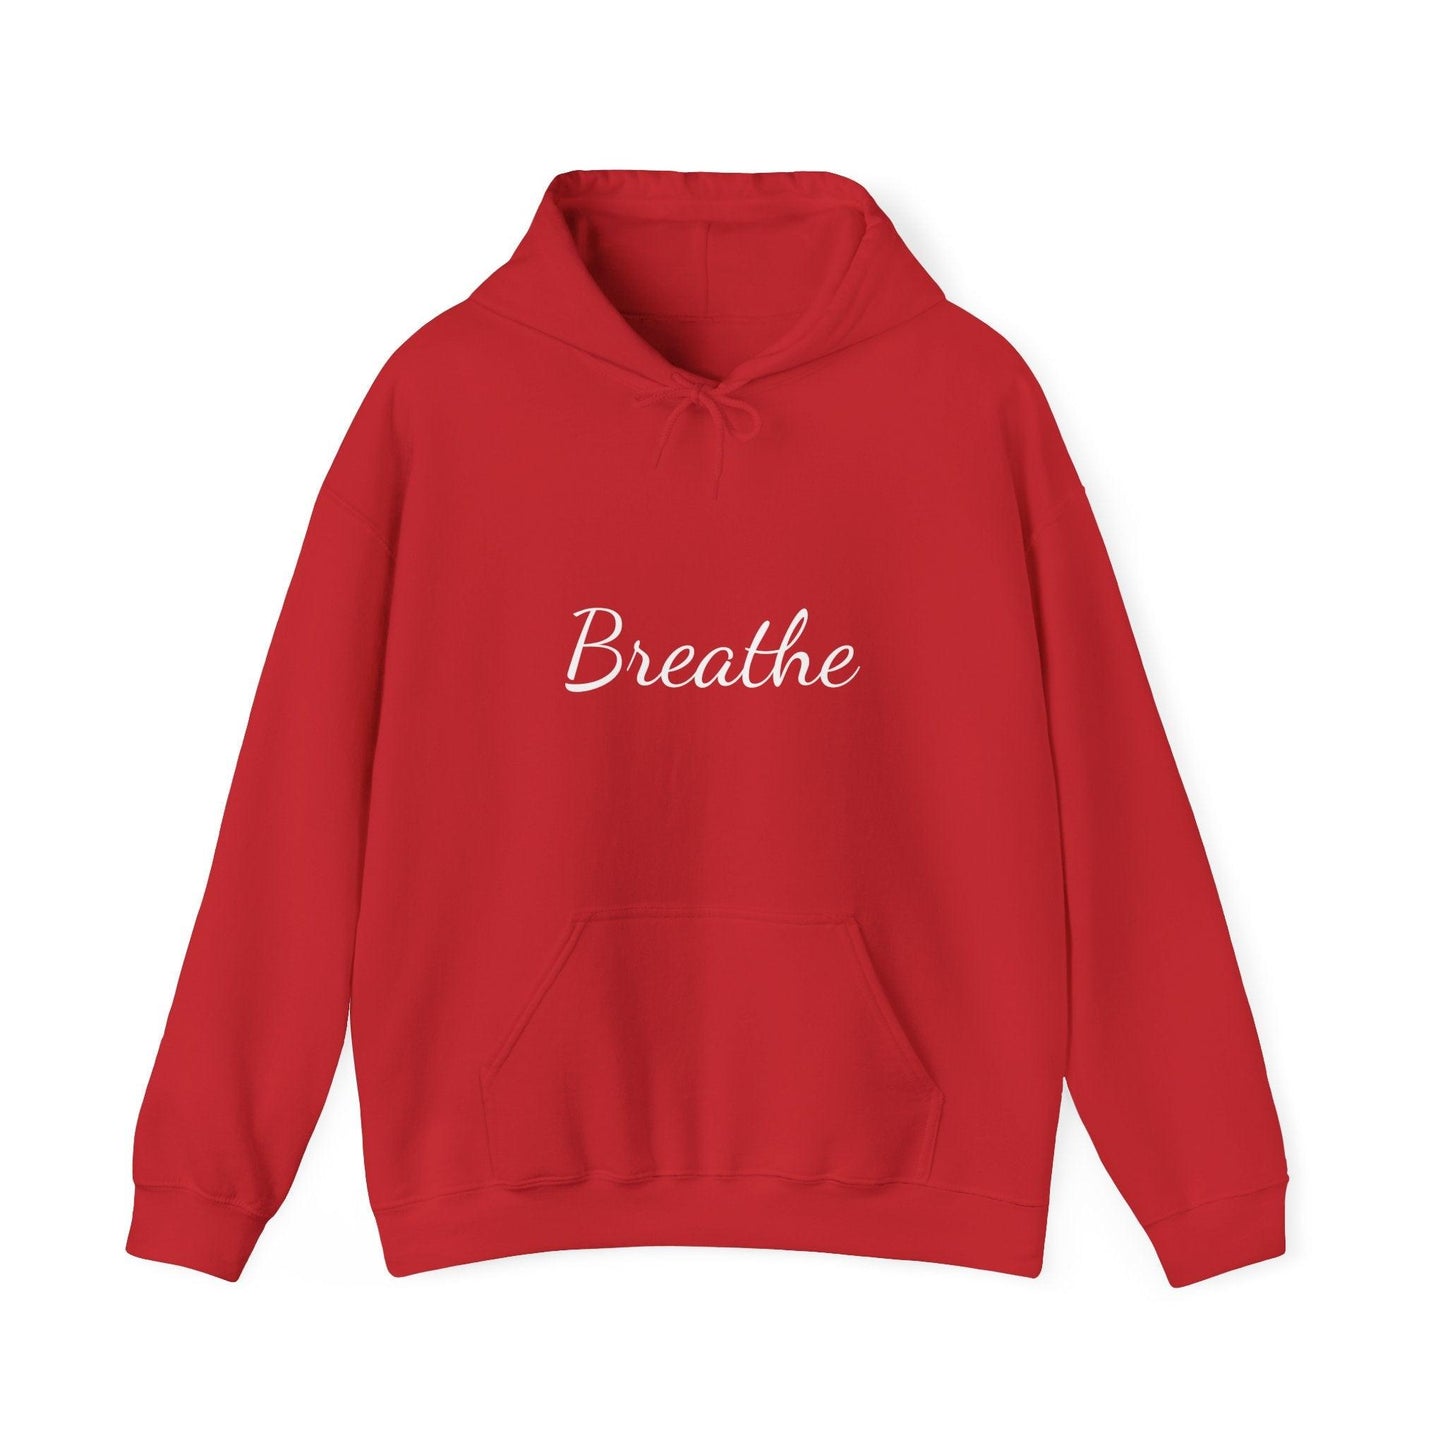 Red Unisex with White Breathe Logo Hoodie - Perfect for Travel, Meditation, Mindfulness and daily wear.